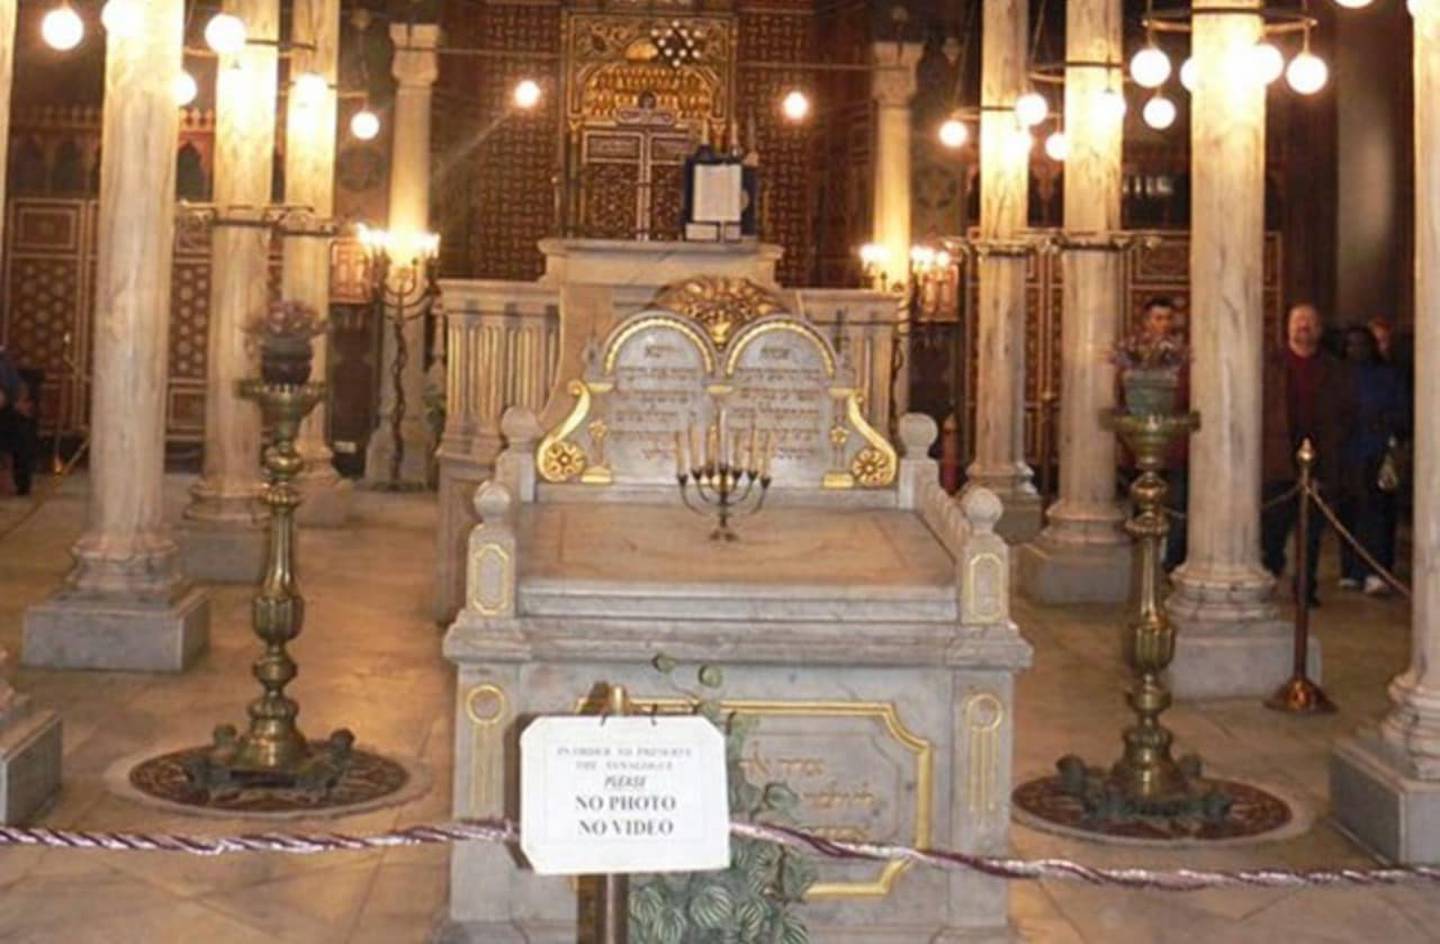 The Ben Ezra synagogue is where the famous ‘Cairo Geniza’, a cache of around 400,000 pages of centuries-old manuscript, were found in the building’s worn text repository.